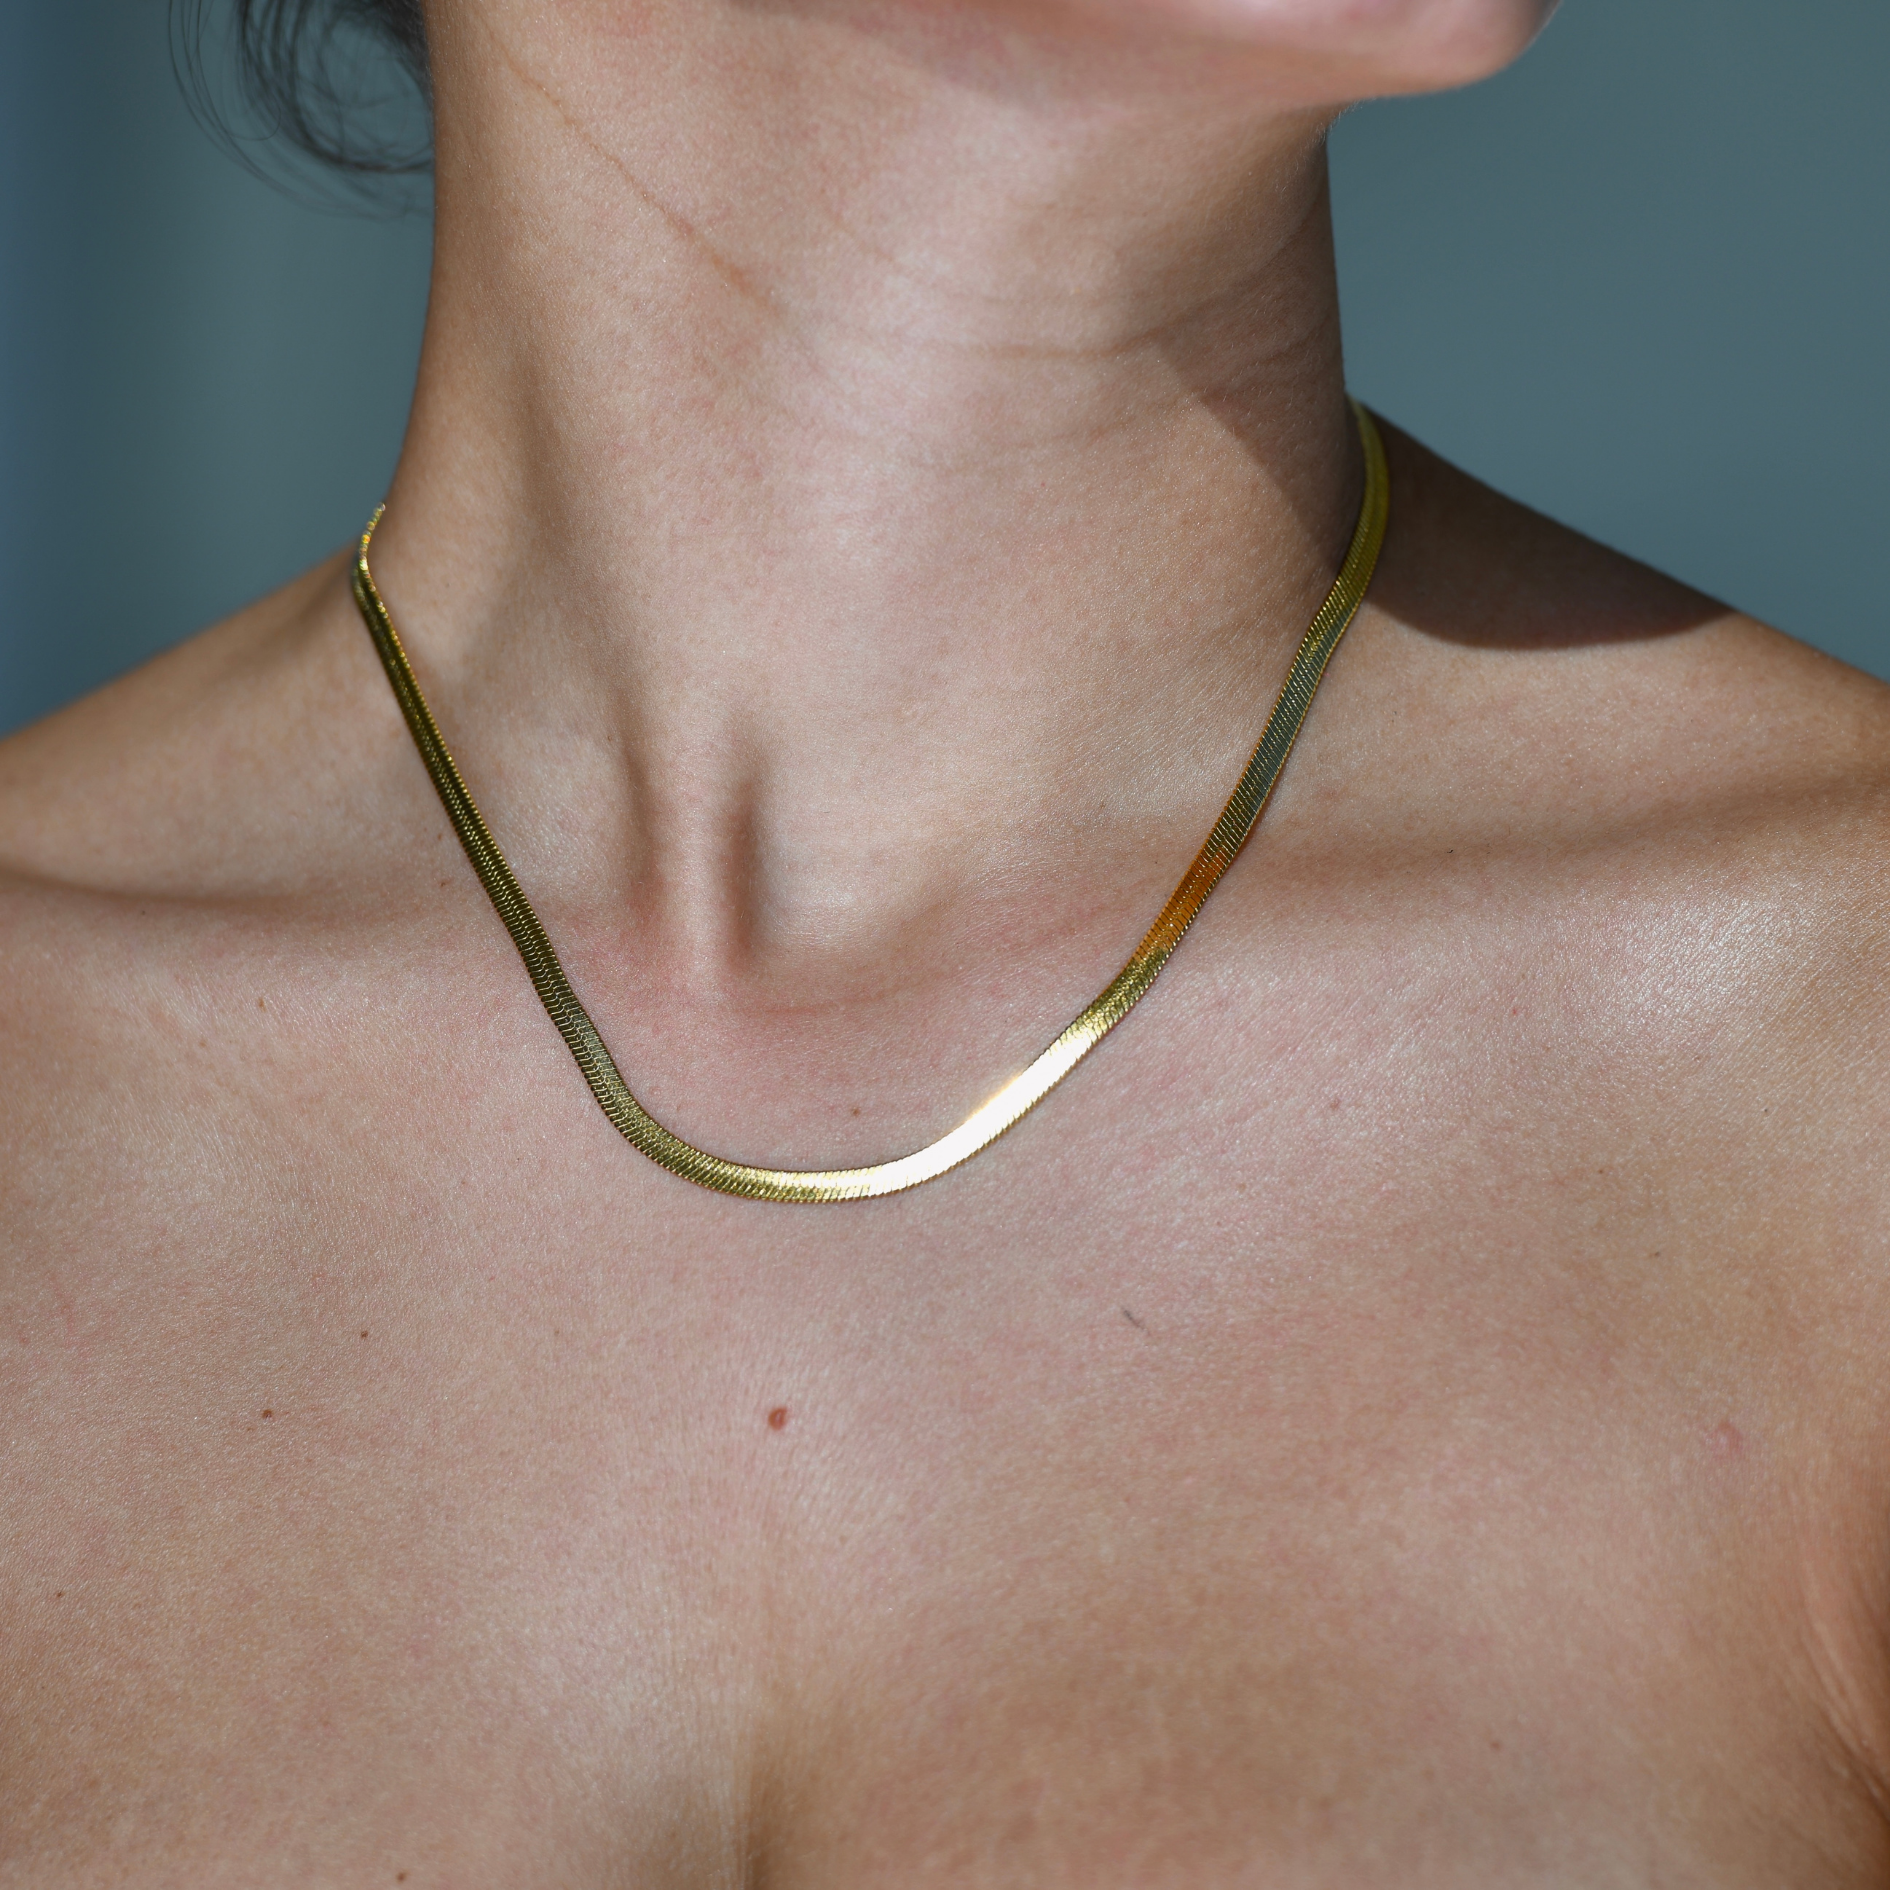 HERRINGBONE M GOLD CHAIN NECKLACE -Gold plated four mm width herringbone patern chain necklace.